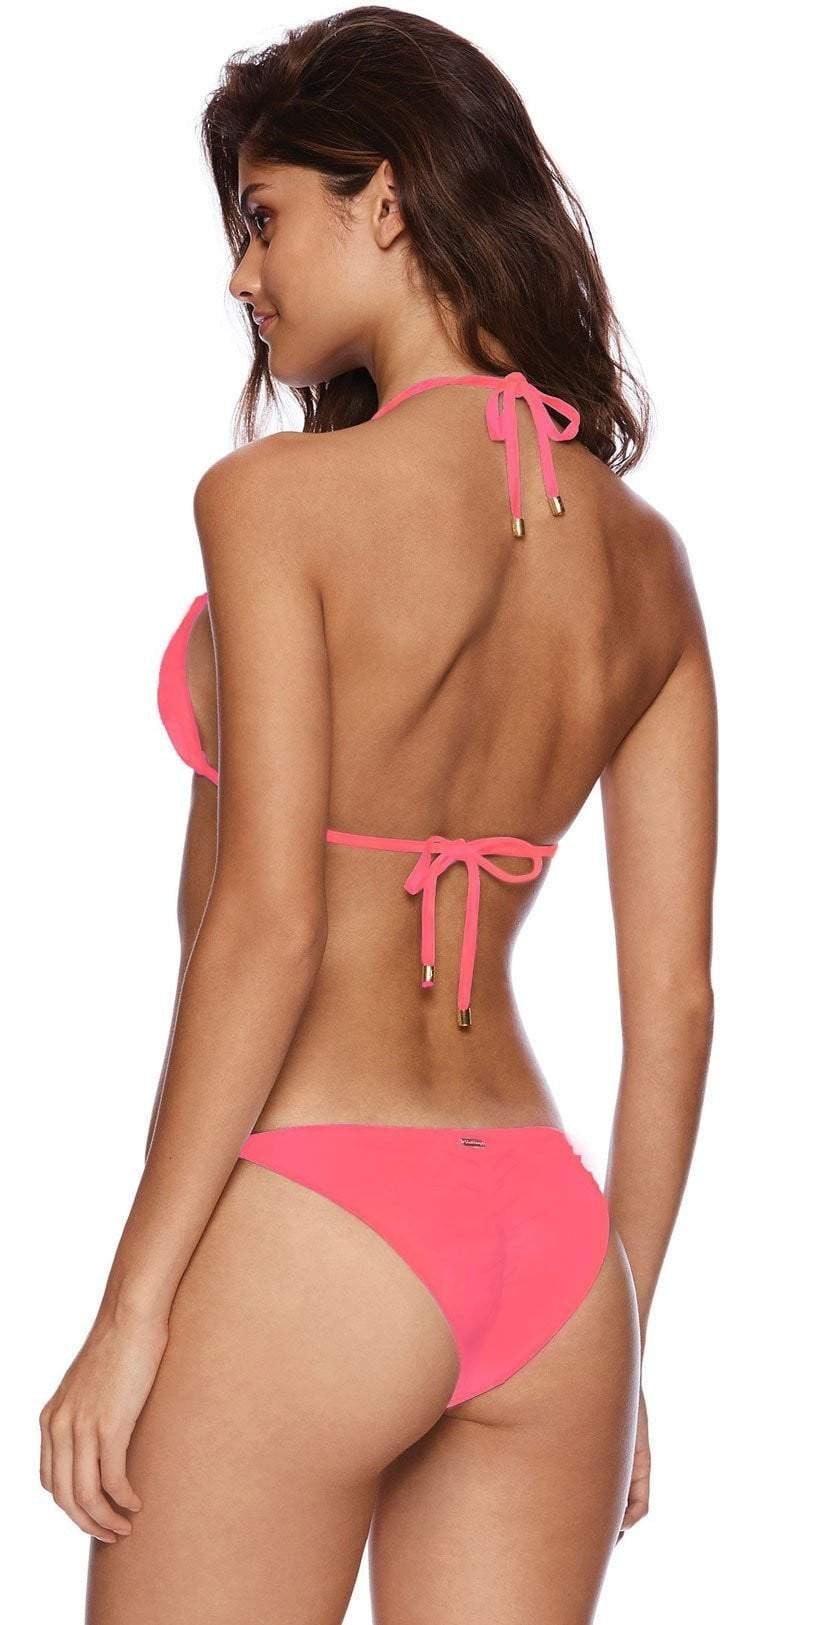 Beach Bunny Ireland Ring Tri Top In Pink B18127T2 BARB: